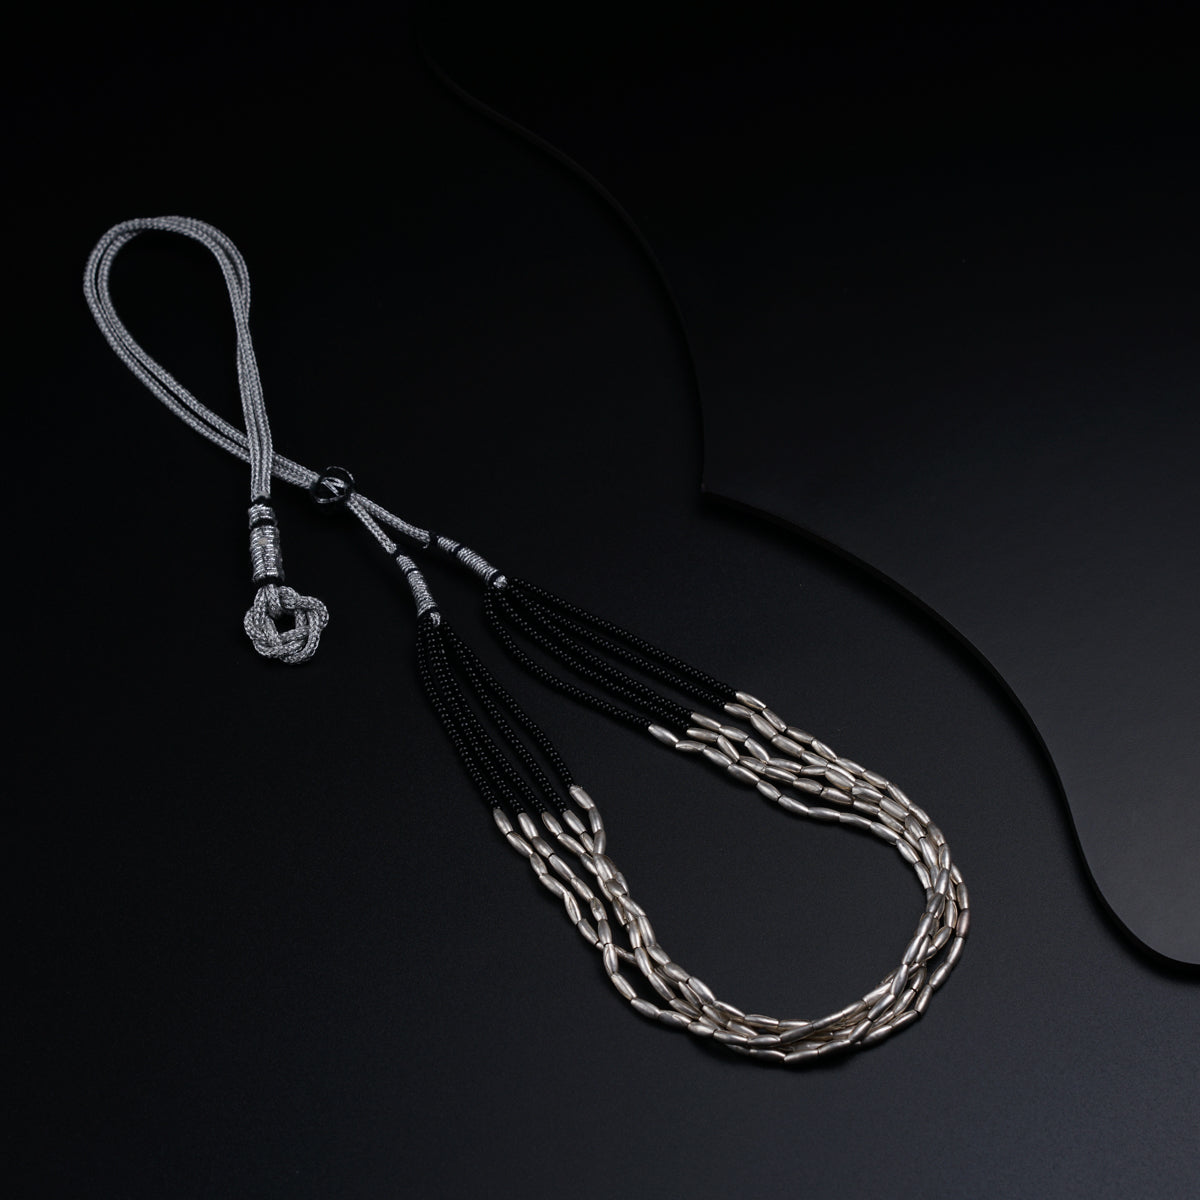 Multilayered Necklace with Silver Findings